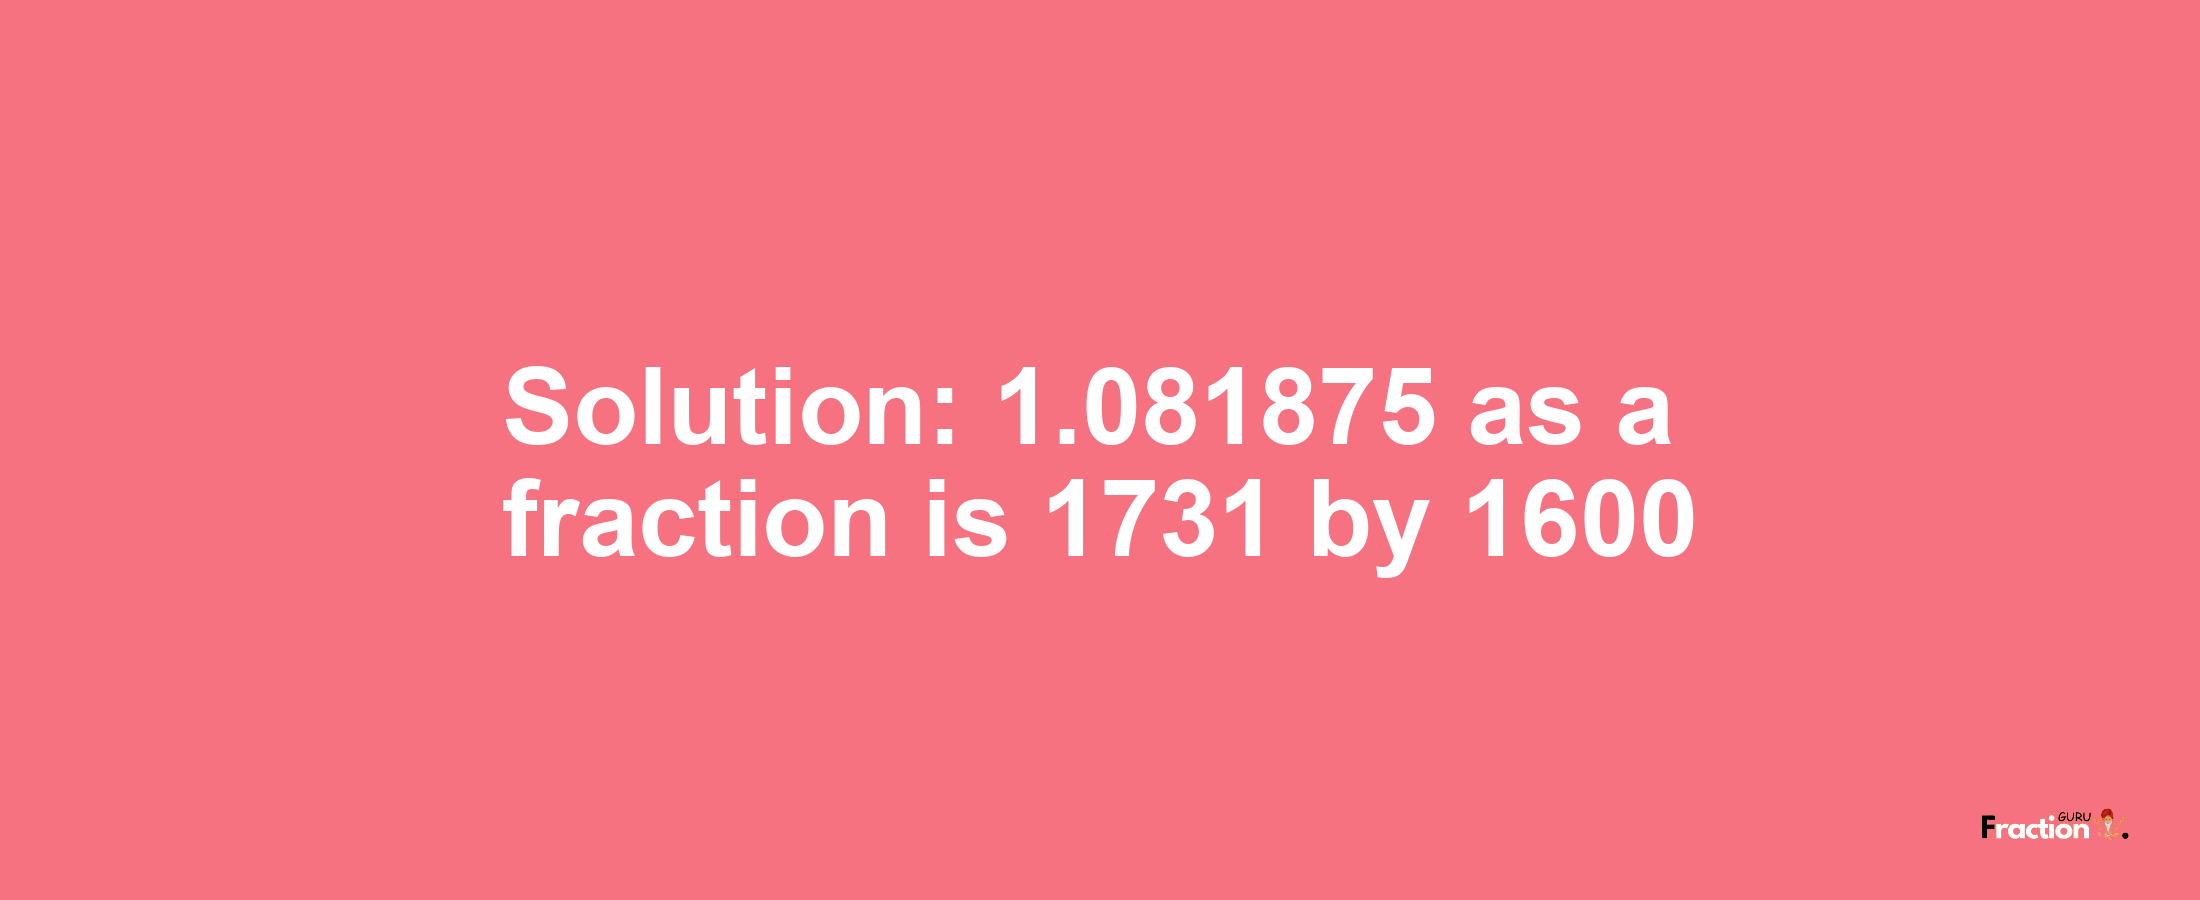 Solution:1.081875 as a fraction is 1731/1600